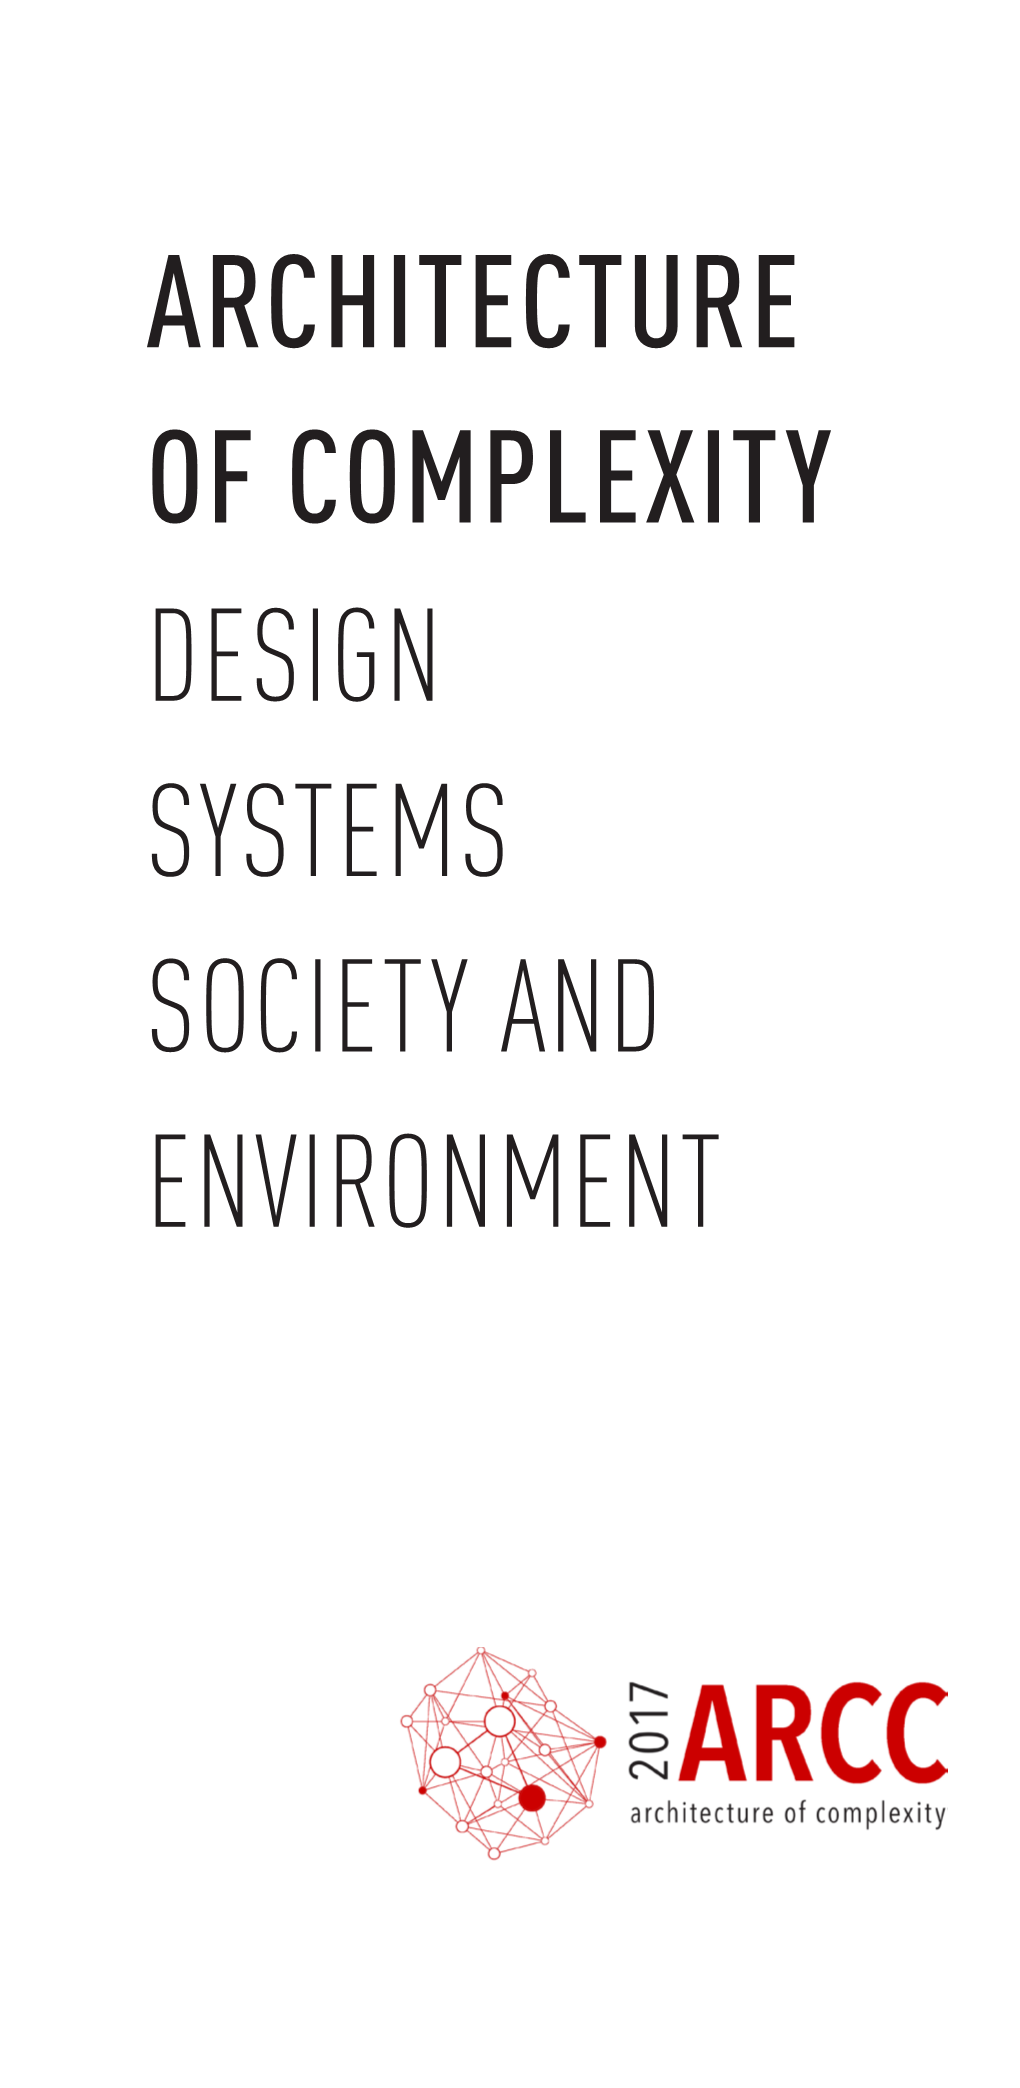 Architecture of Complexity Design Systems Society and Environment